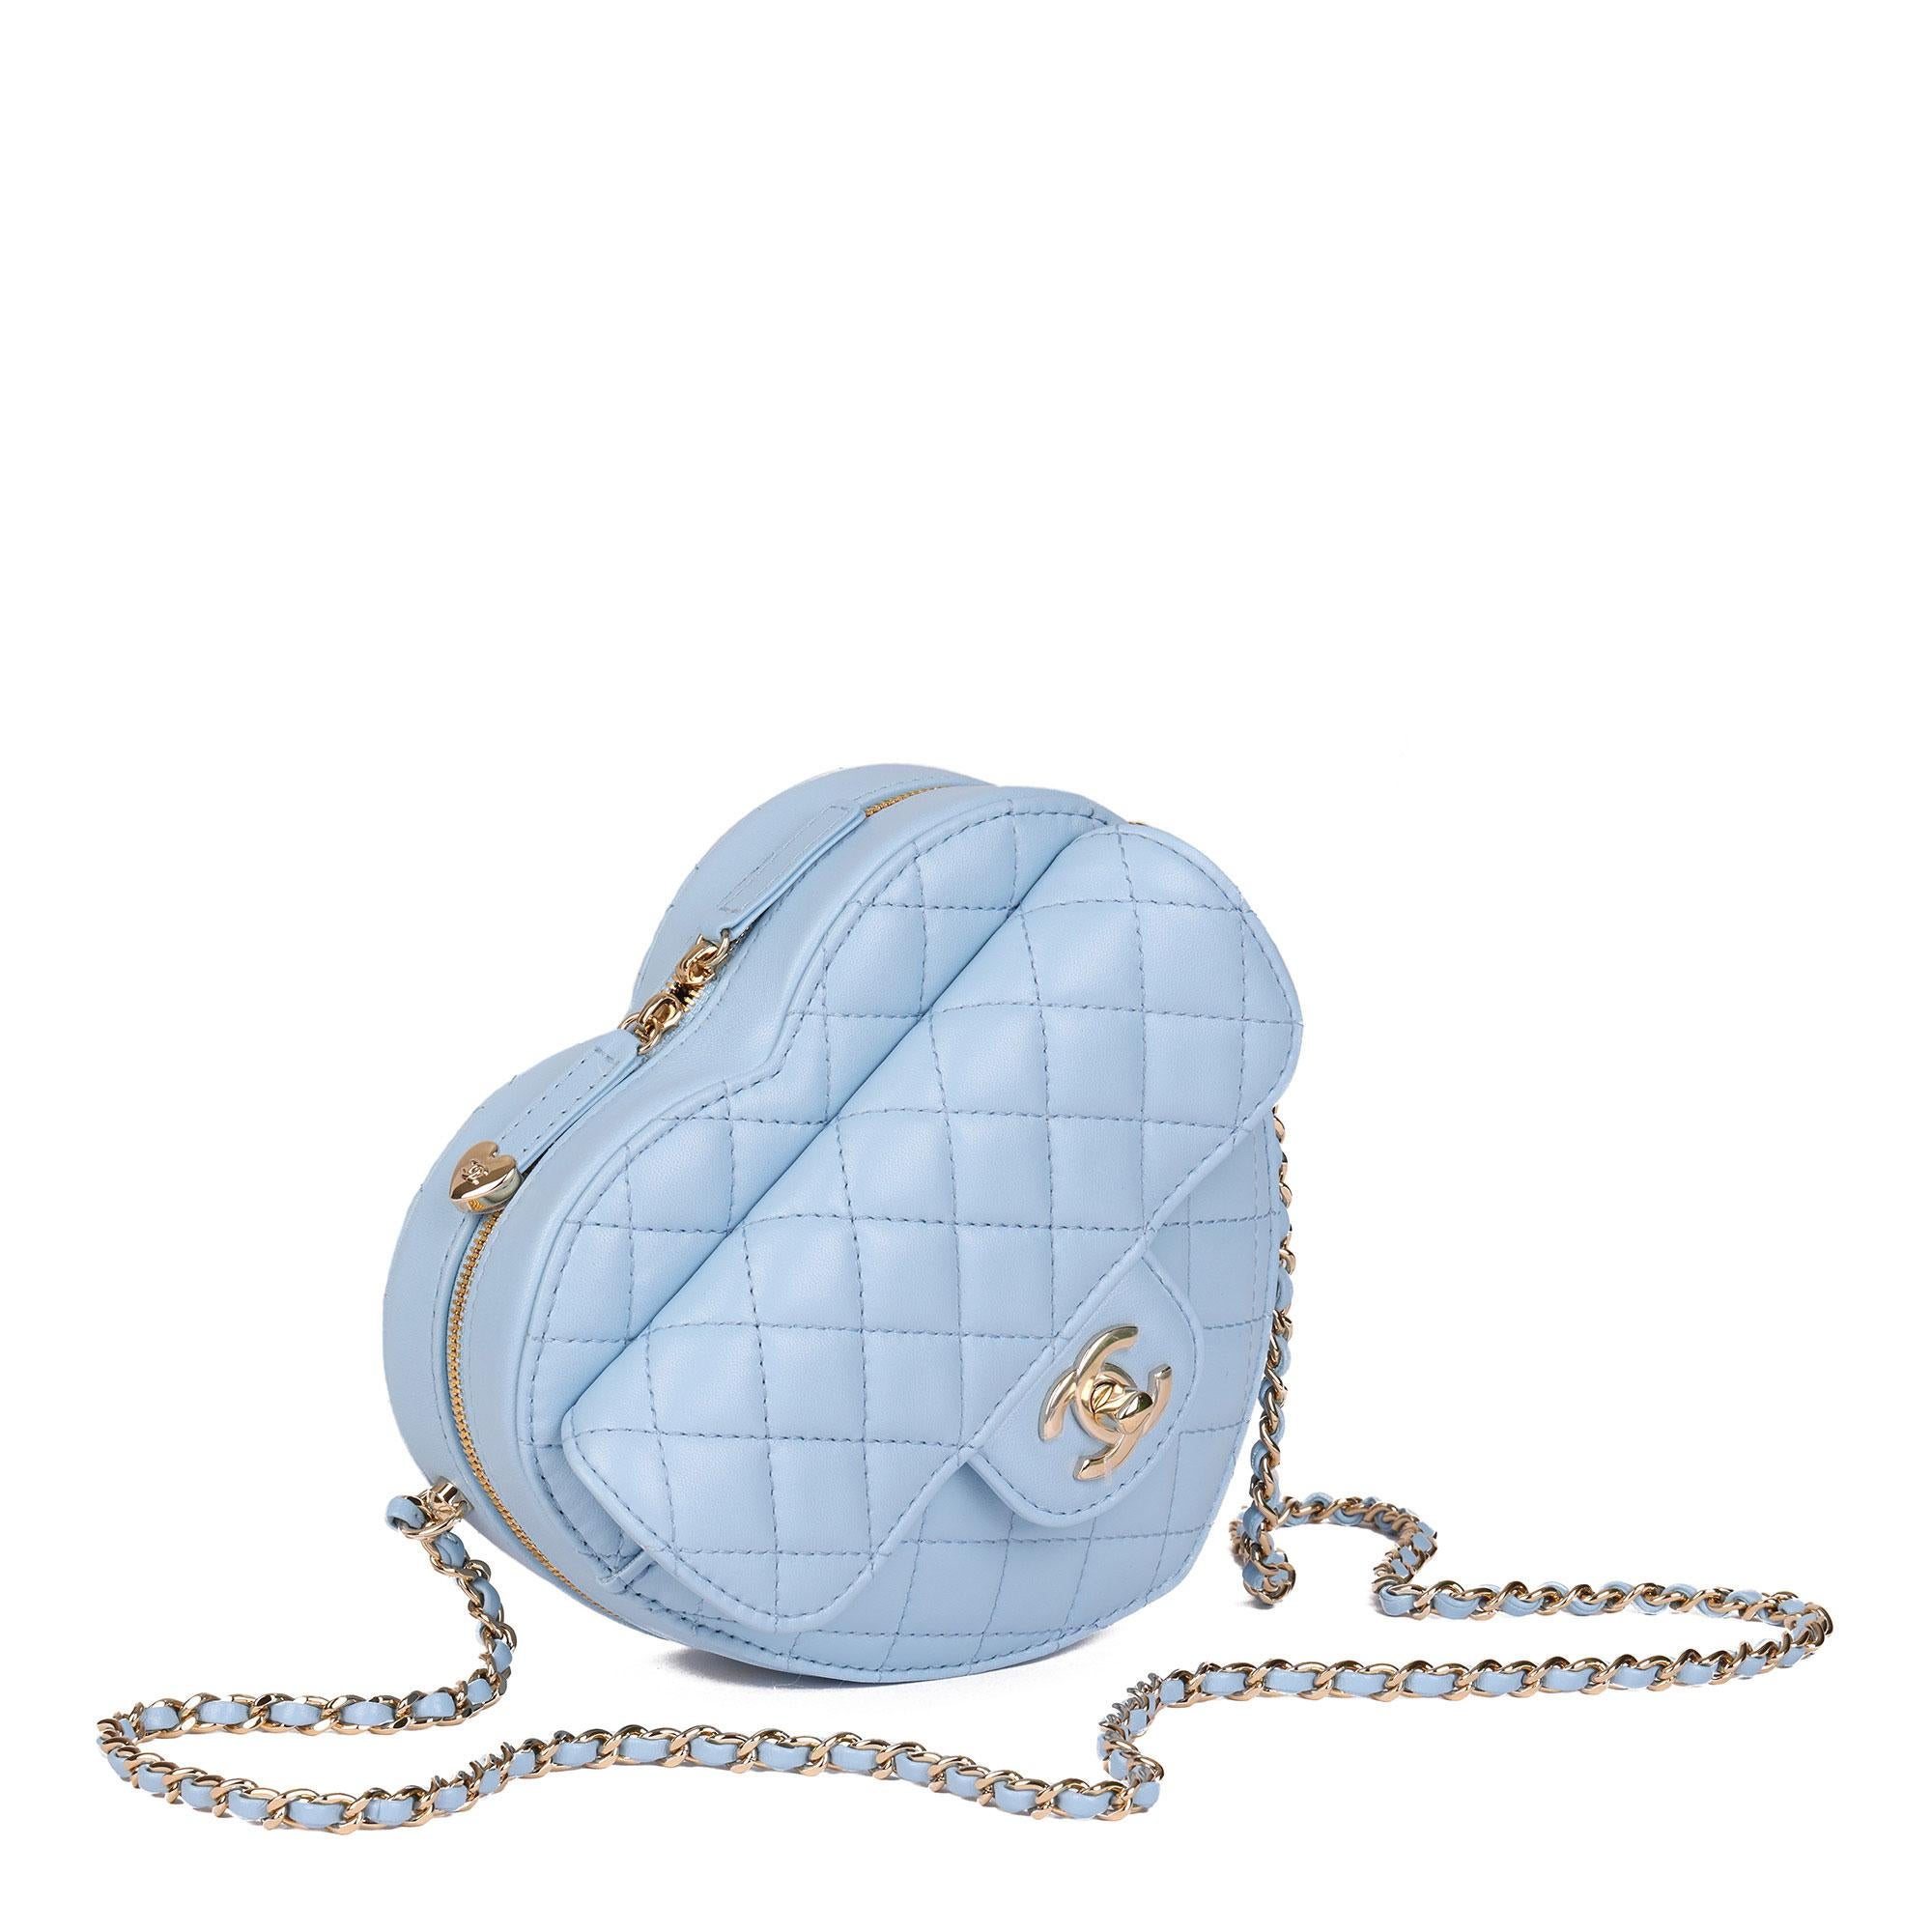 CHANEL
Blue Quilted Lambskin Leather Heart Bag 

Xupes Reference: CB716
Serial Number: X
Age (Circa): 2022
Accompanied By: Chanel Dust Bag, Box, Protective Felt, Care Booklet
Authenticity Details: Microchip (Made in France)
Gender: Ladies
Type: